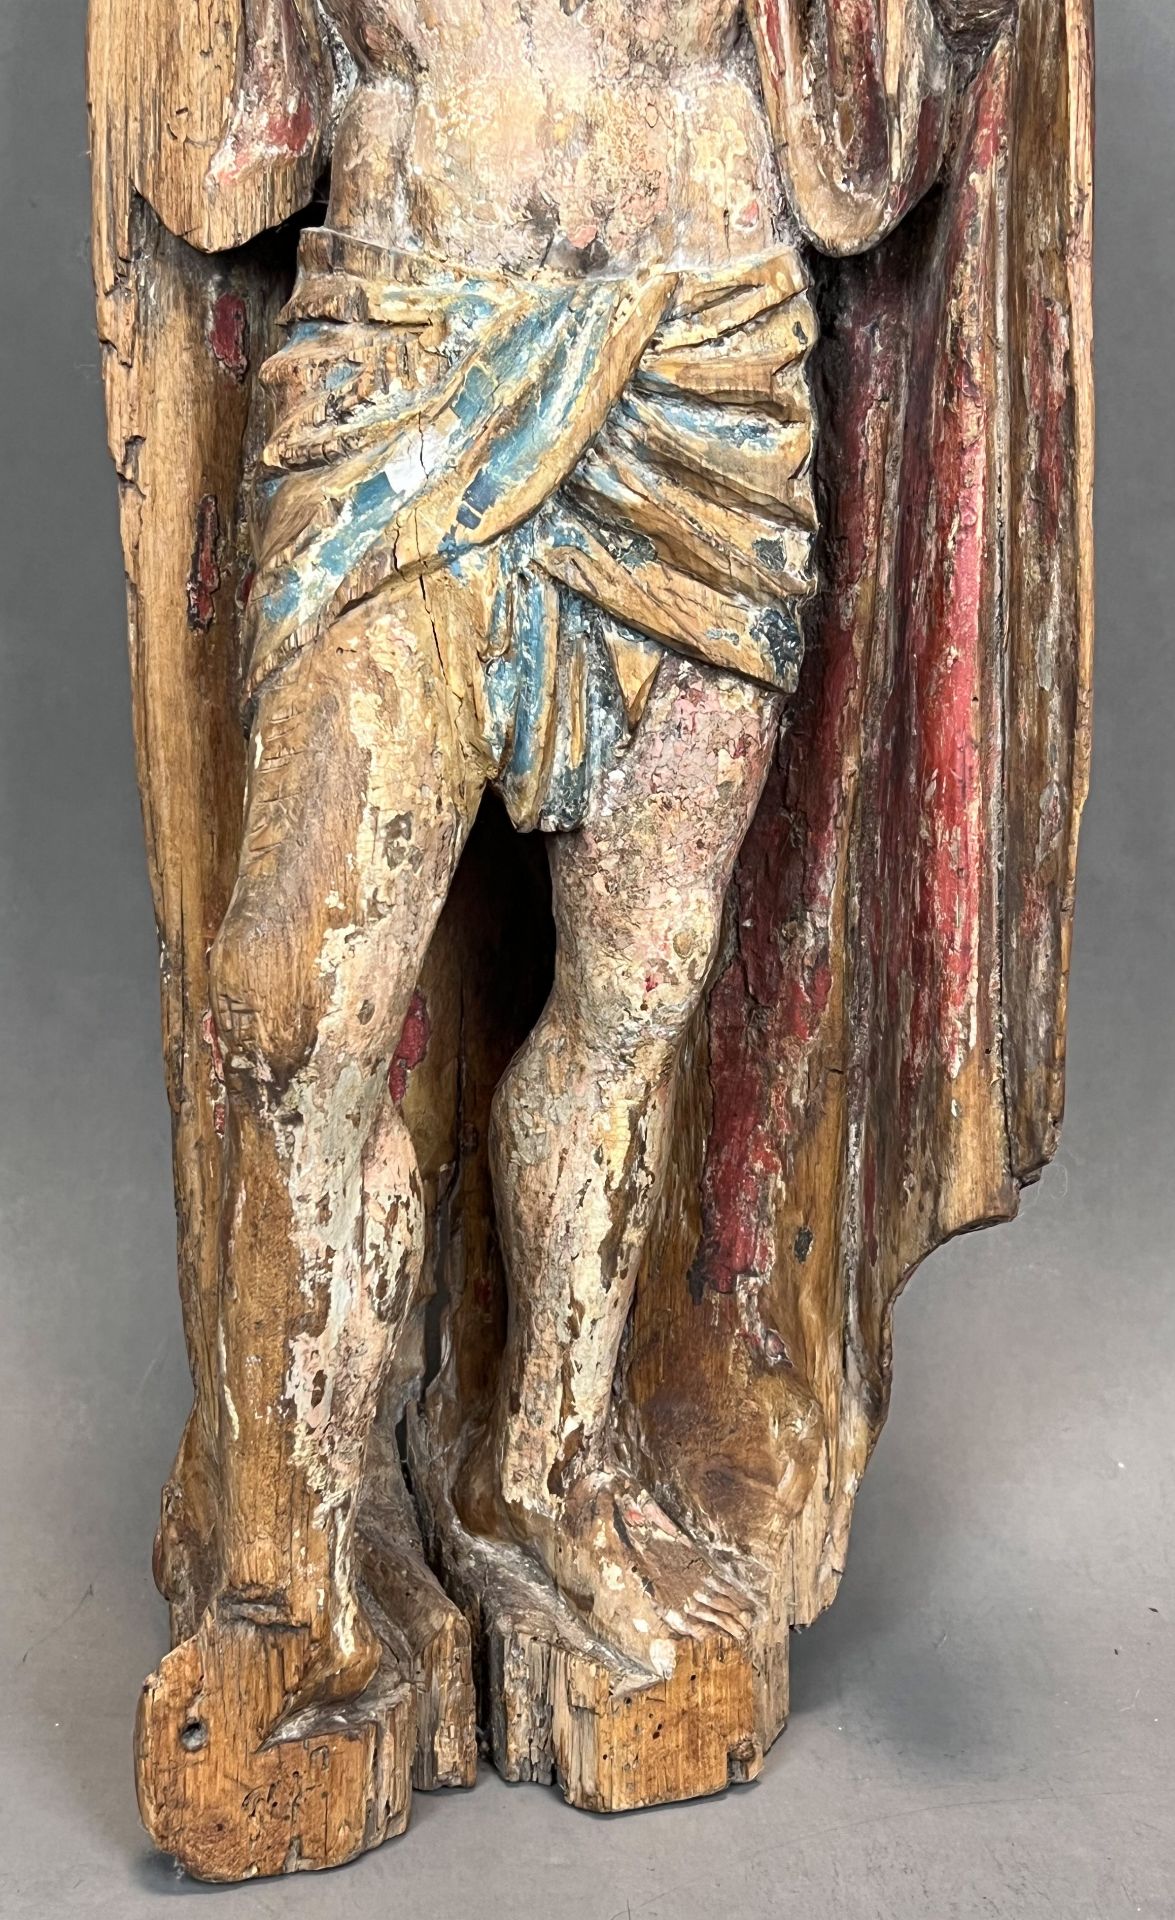 Wooden figure. Christ. Gothic style. Mid 15th century. Lower Rhine. - Image 3 of 15